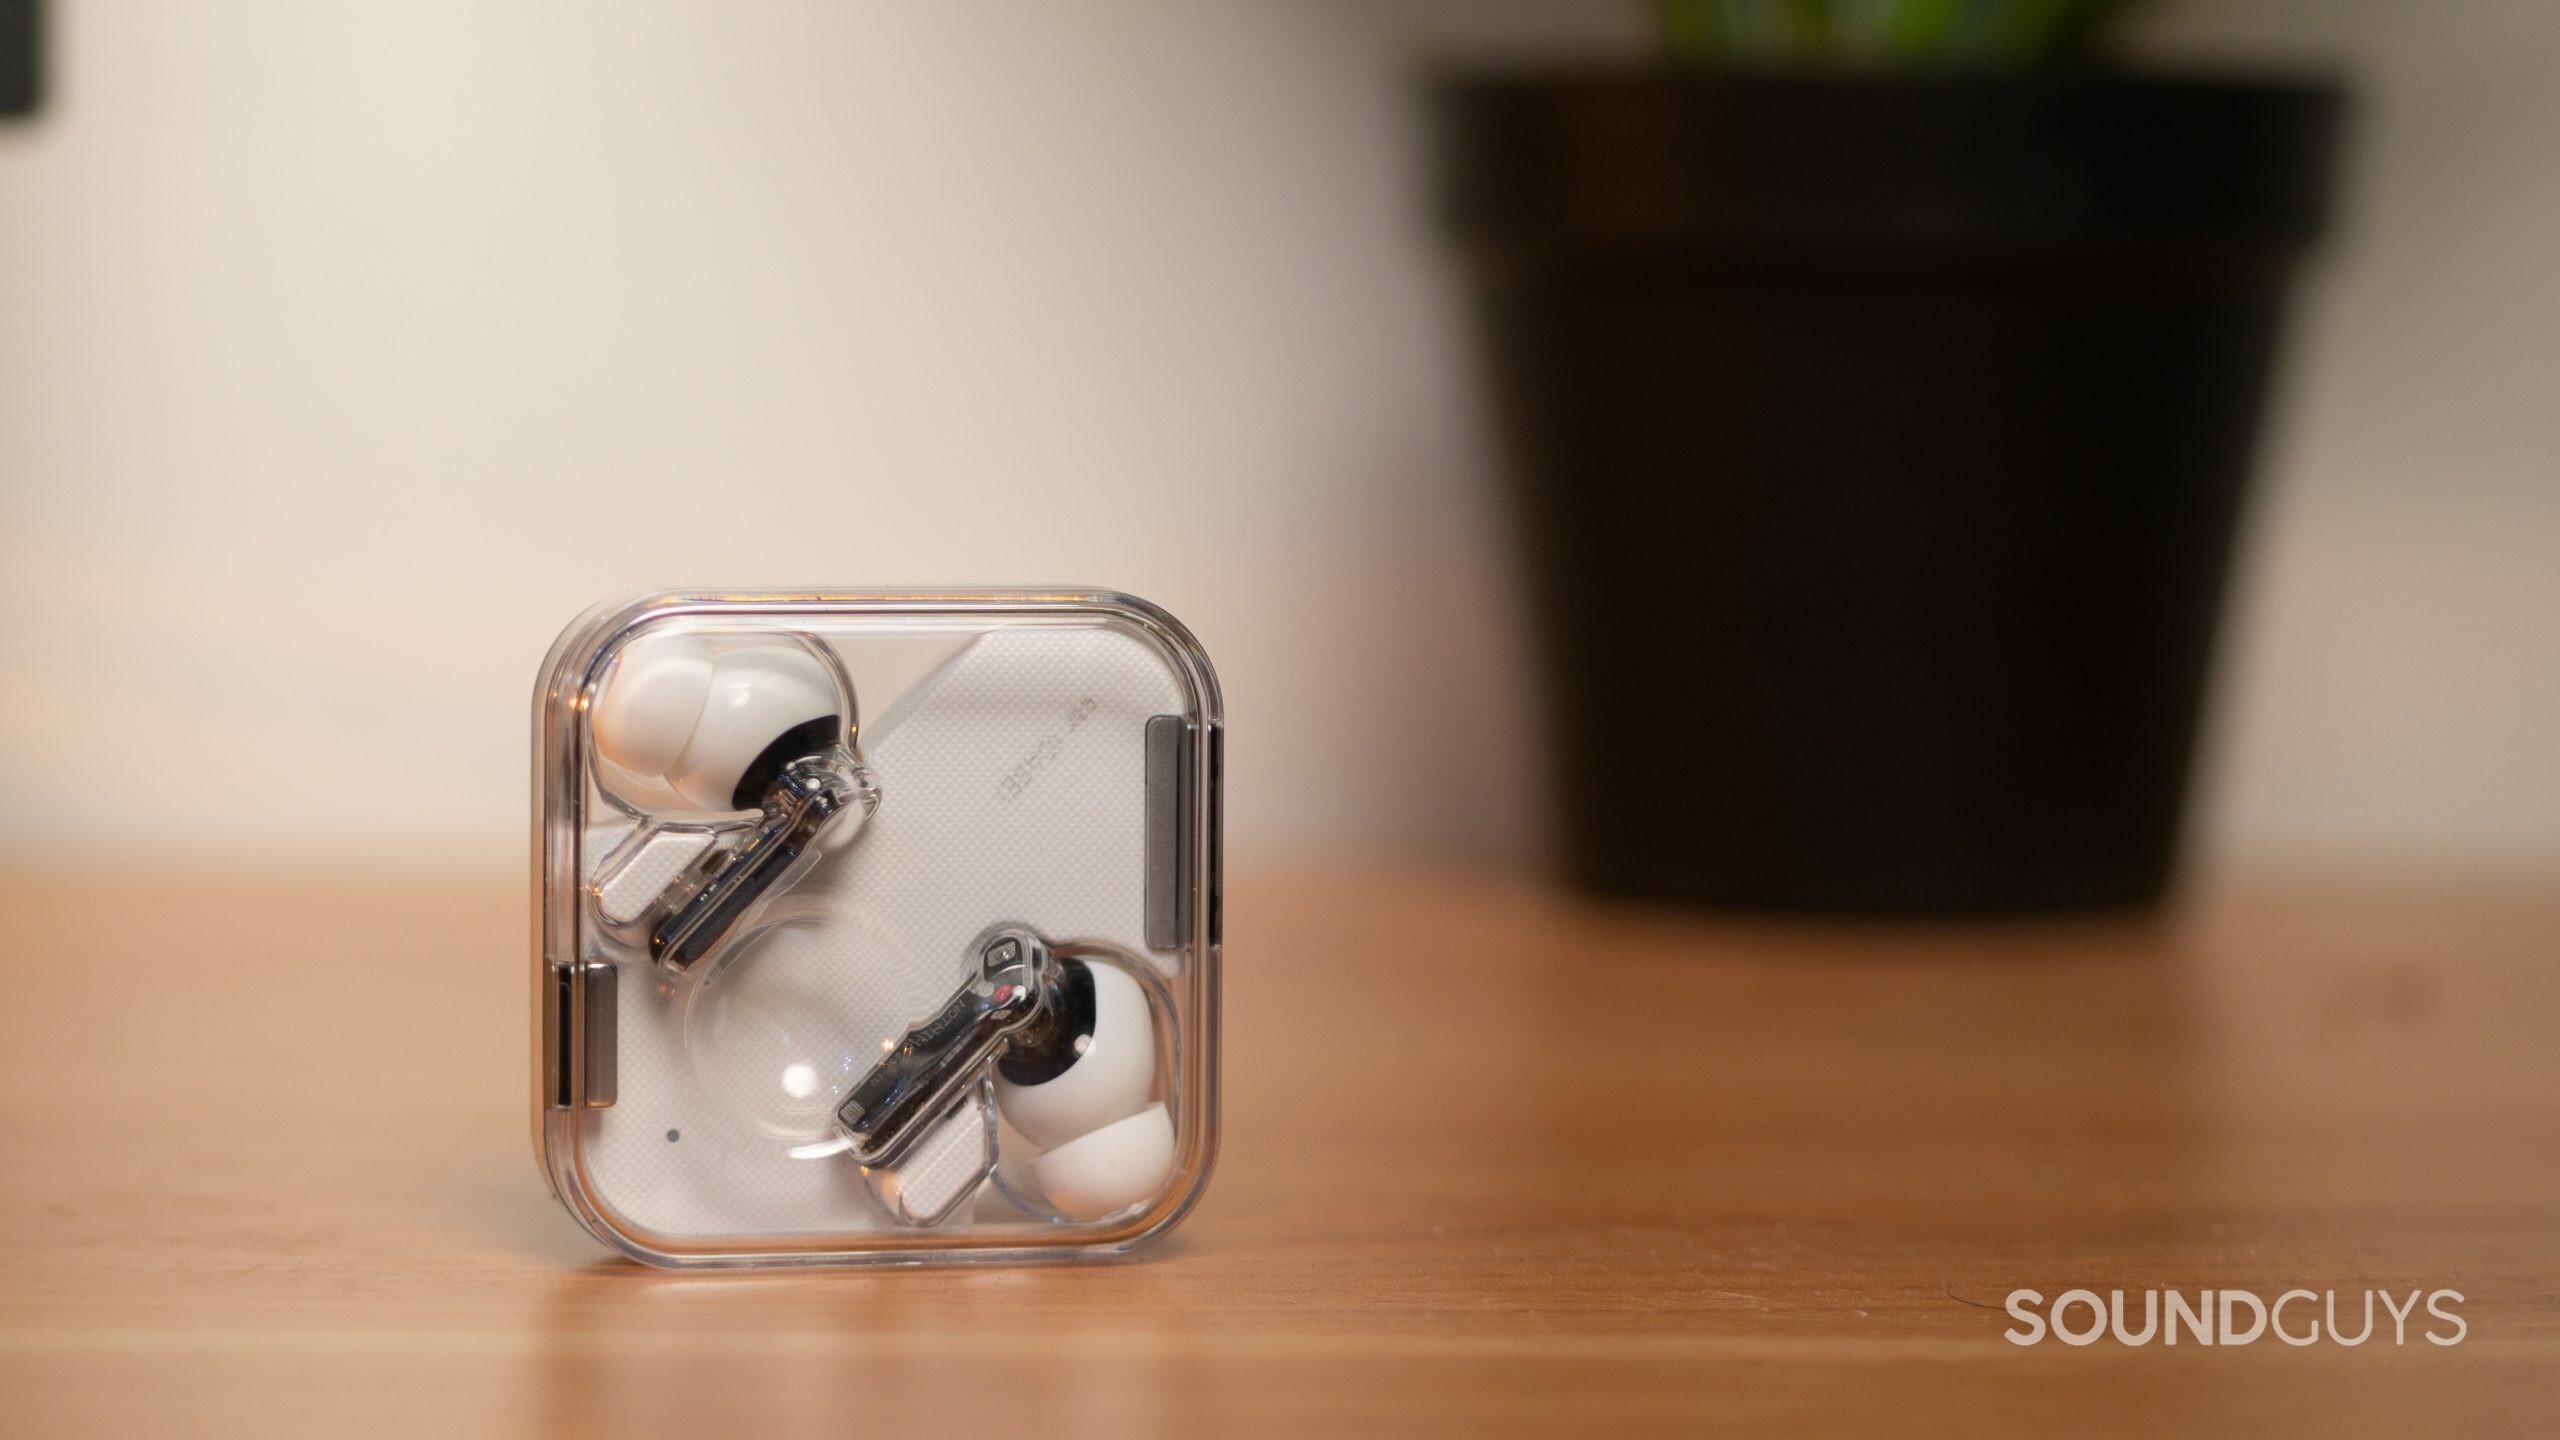 The Nothing Ear 1 true wireless earbuds rest in the clear case as it stands upright on a wood surface.